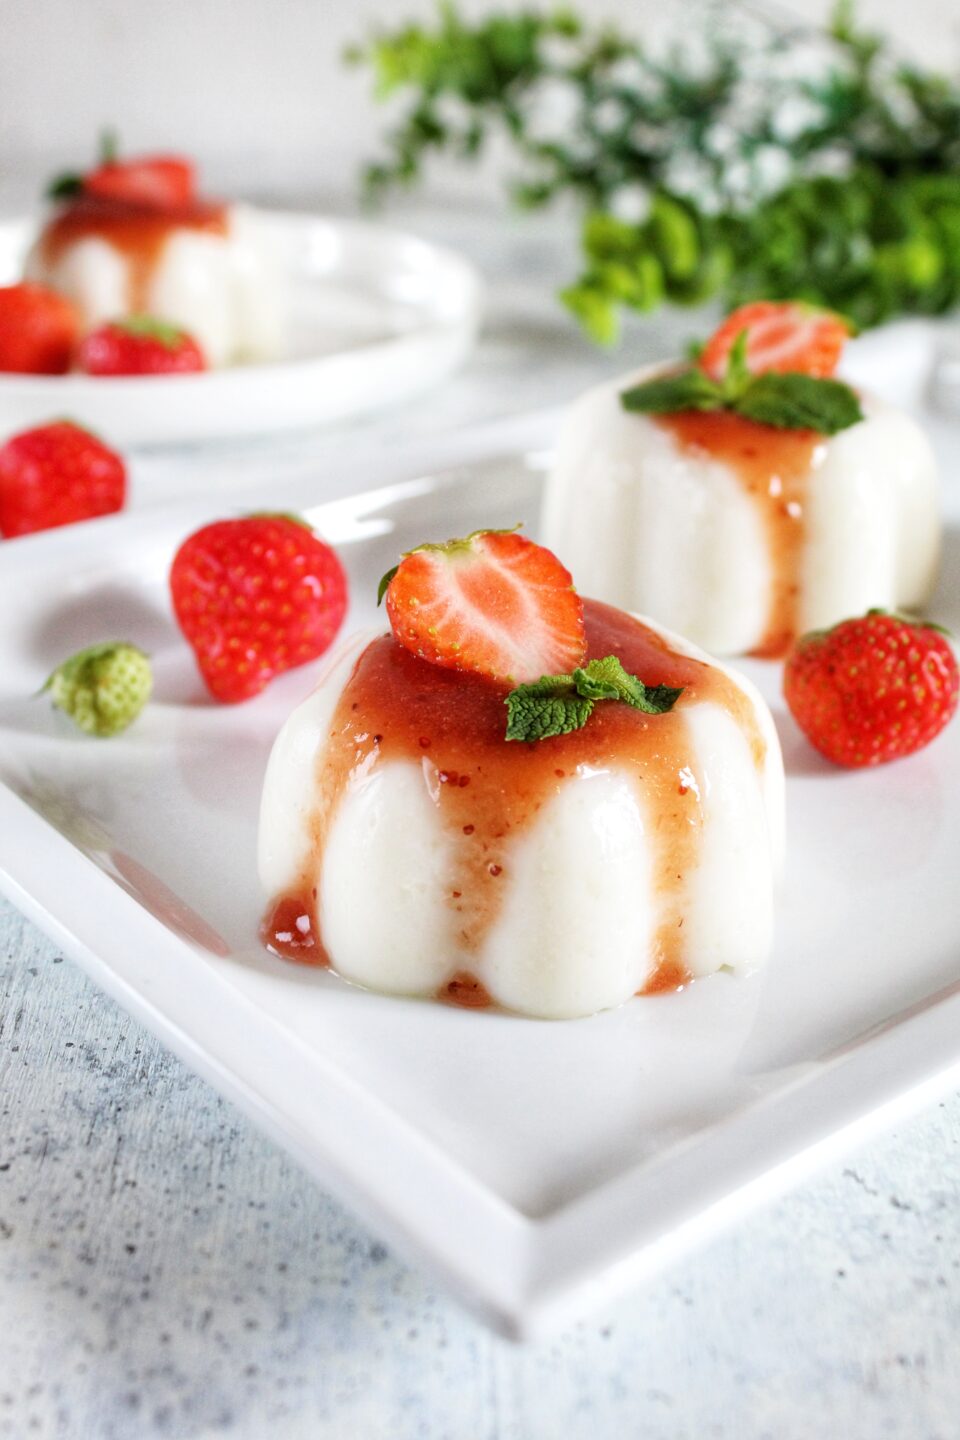 Almond puddings with strawberry coulis